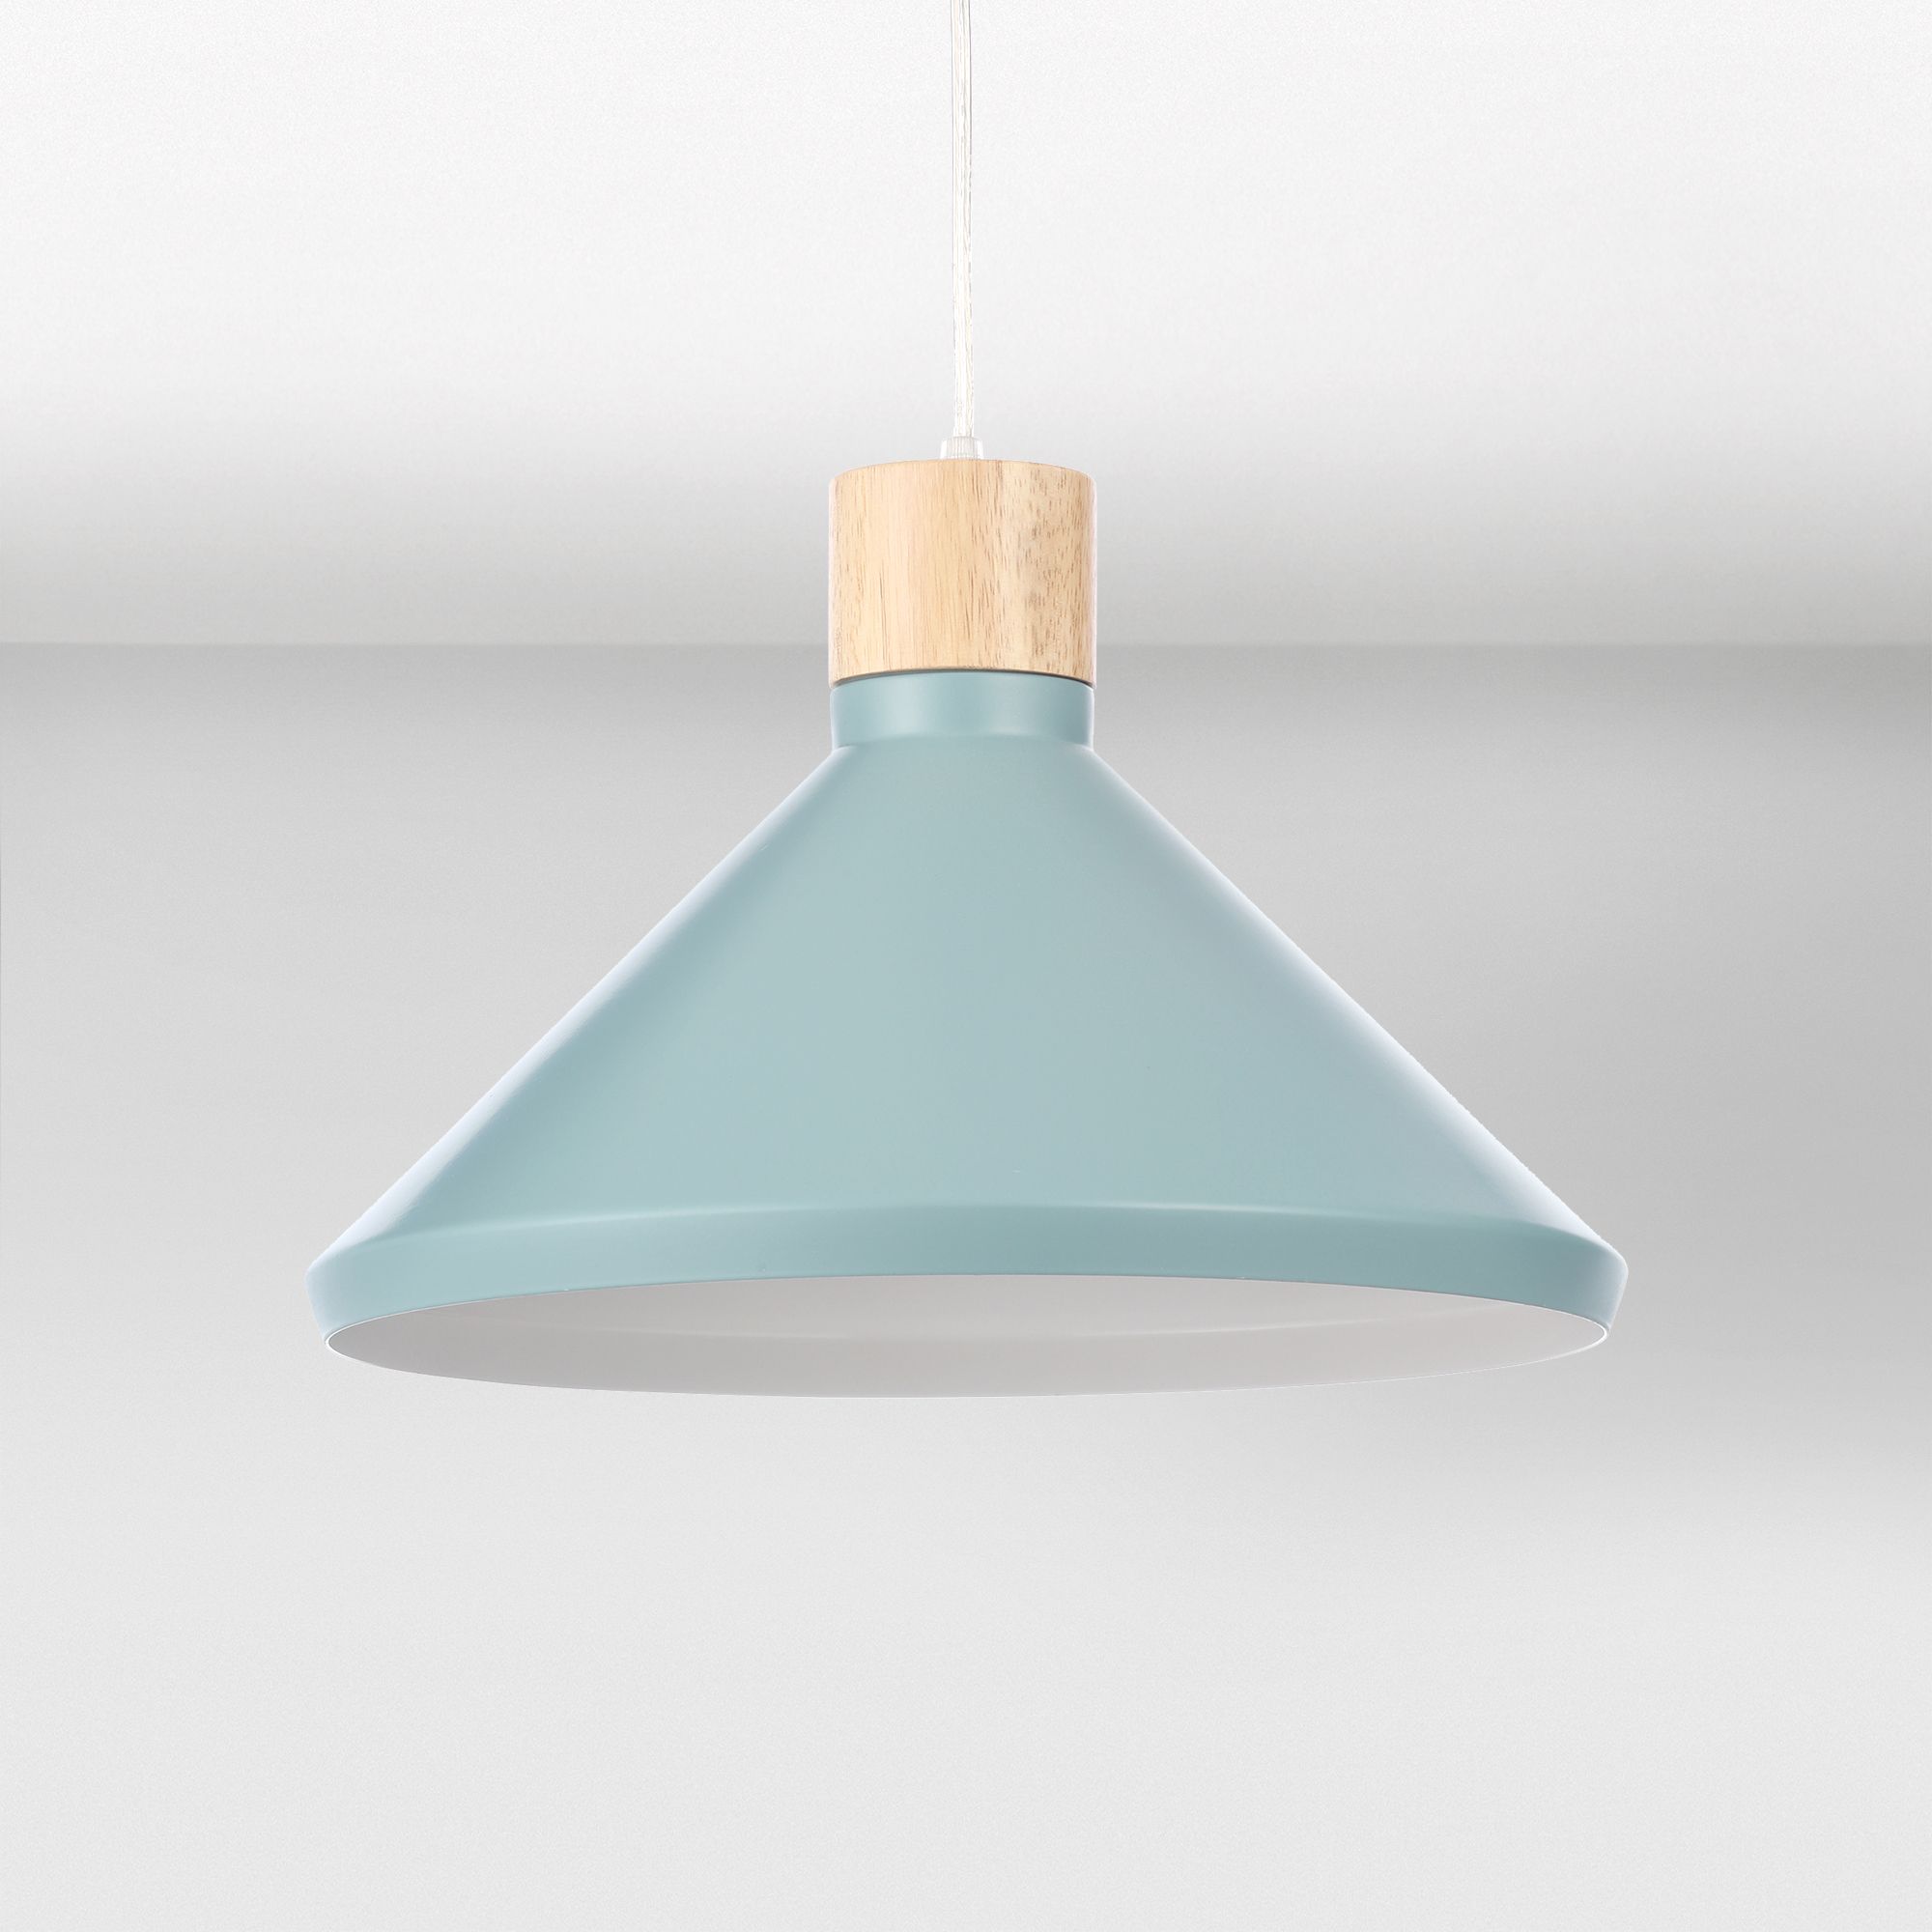 Colours Selma Gloss Teal Cone Light Shade D 350mm Departments